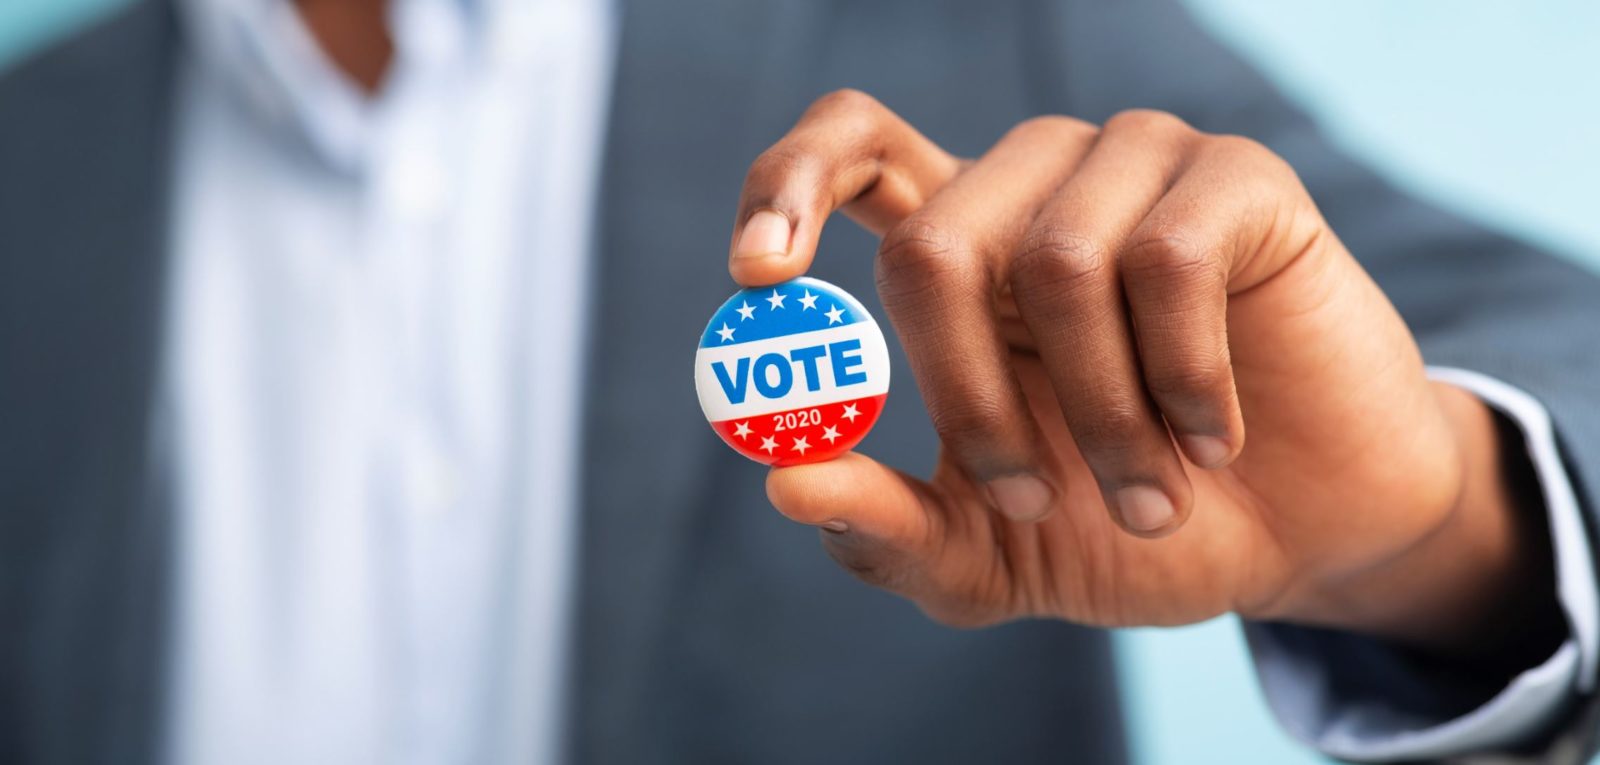 African American man holds a VOTE lapel button